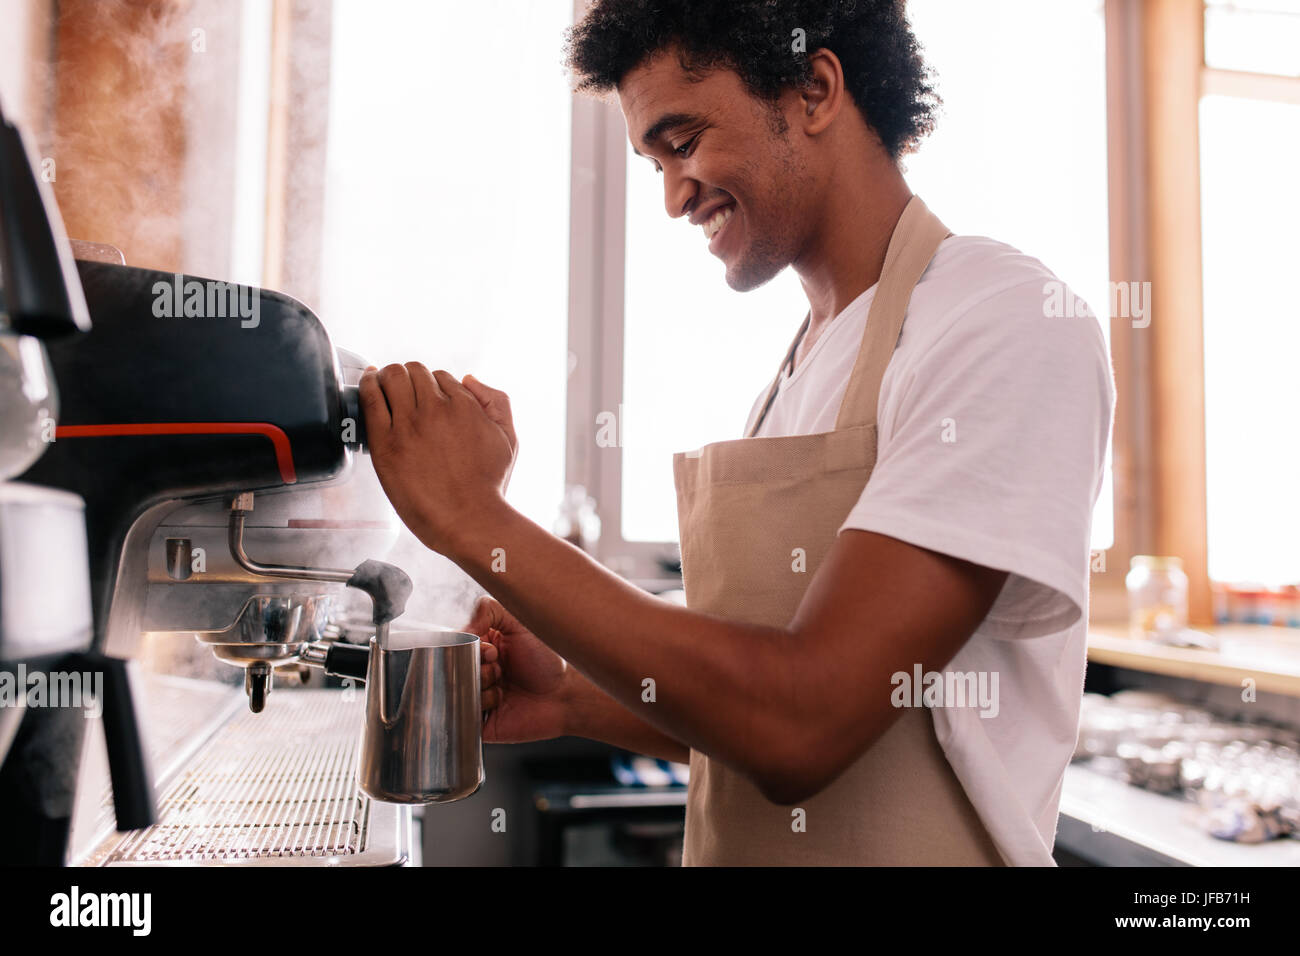 Smiling barista holding metal jug warming milk using the coffee machine. Happy young man preparing coffee at counter. Stock Photo